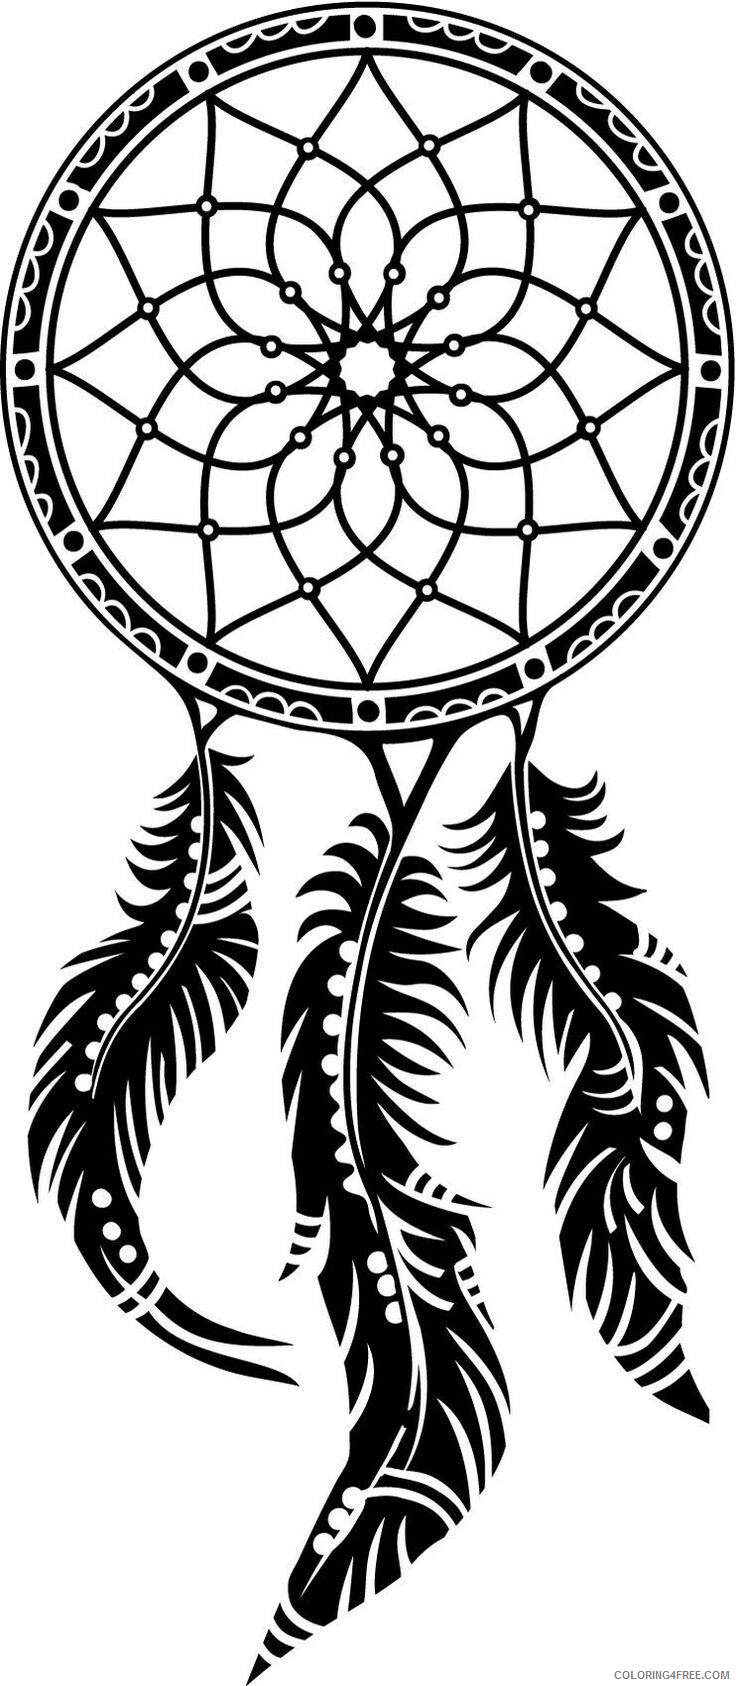 Dream Catcher Coloring Pages Dream Catcher Printable 2021 2080 Coloring4free